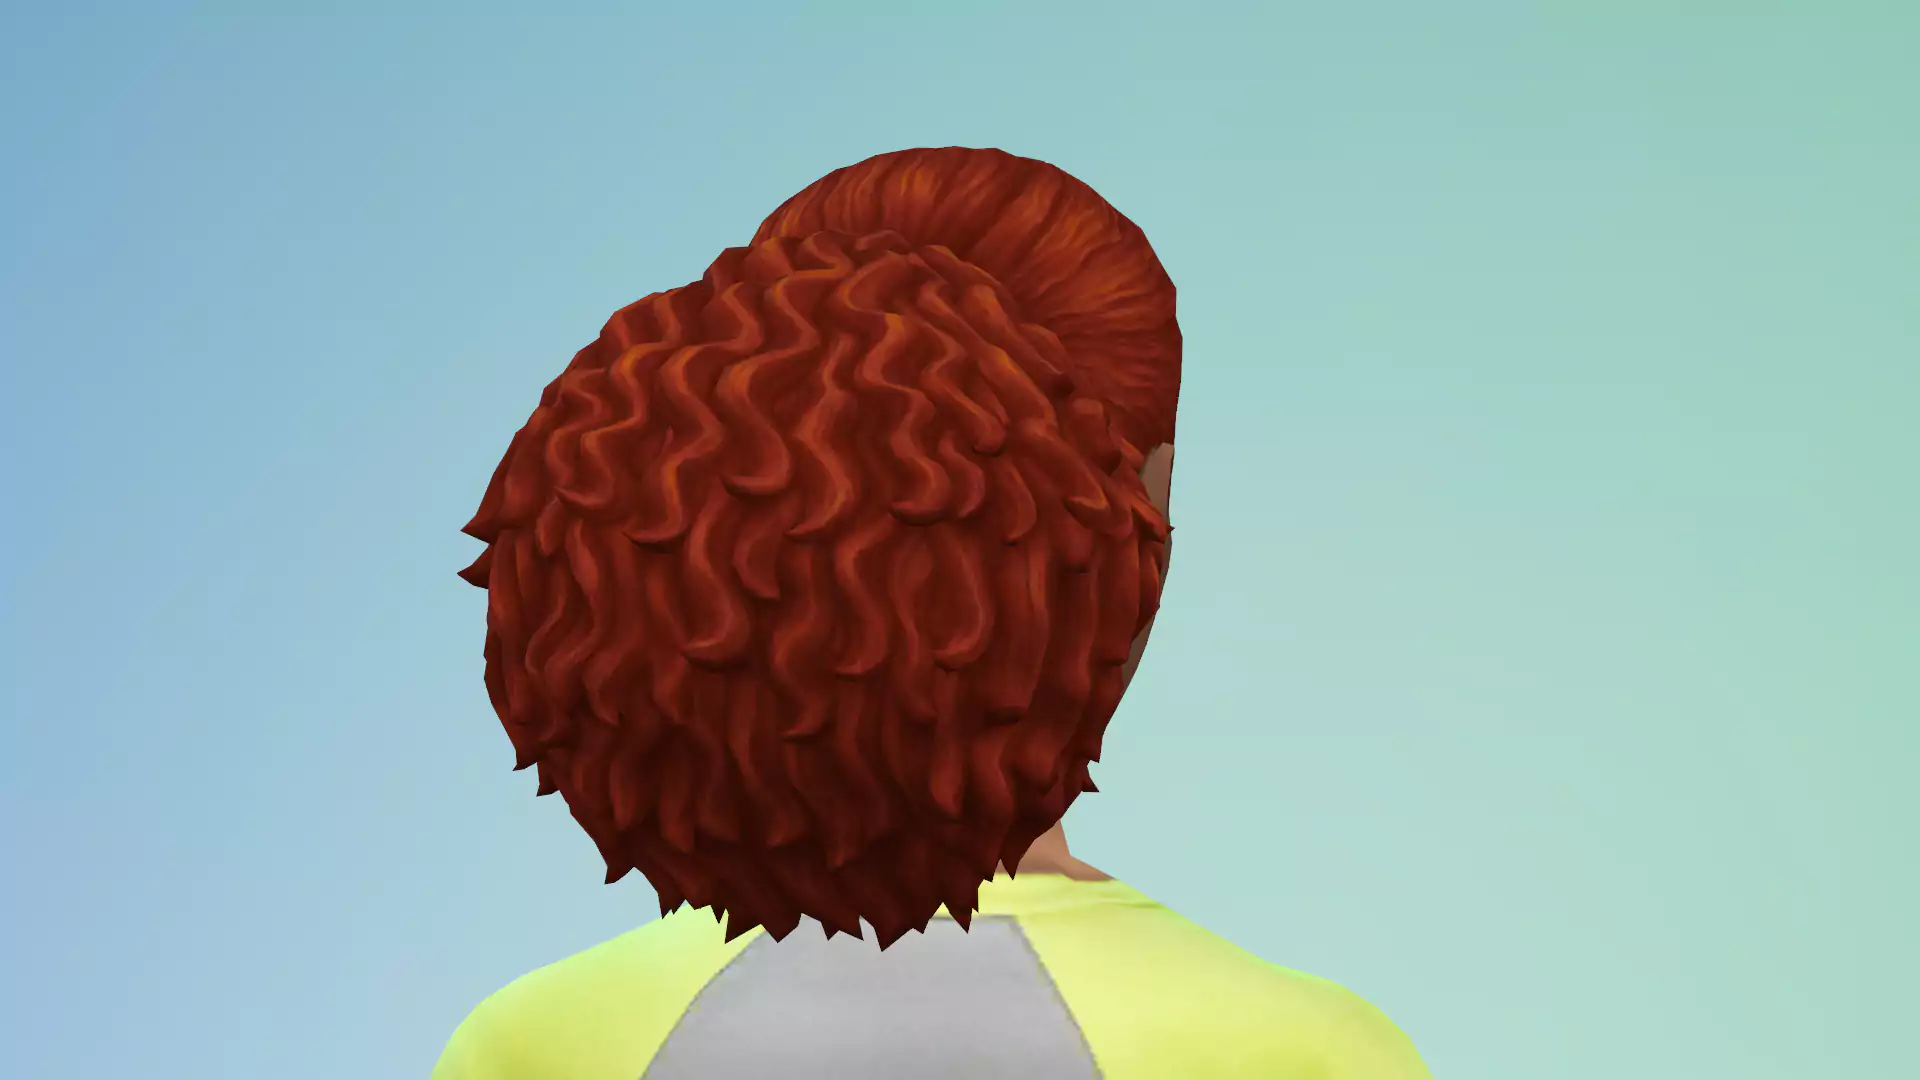 Sims 4 Delivery Express Beta 1.0.1 - New Hair - Back